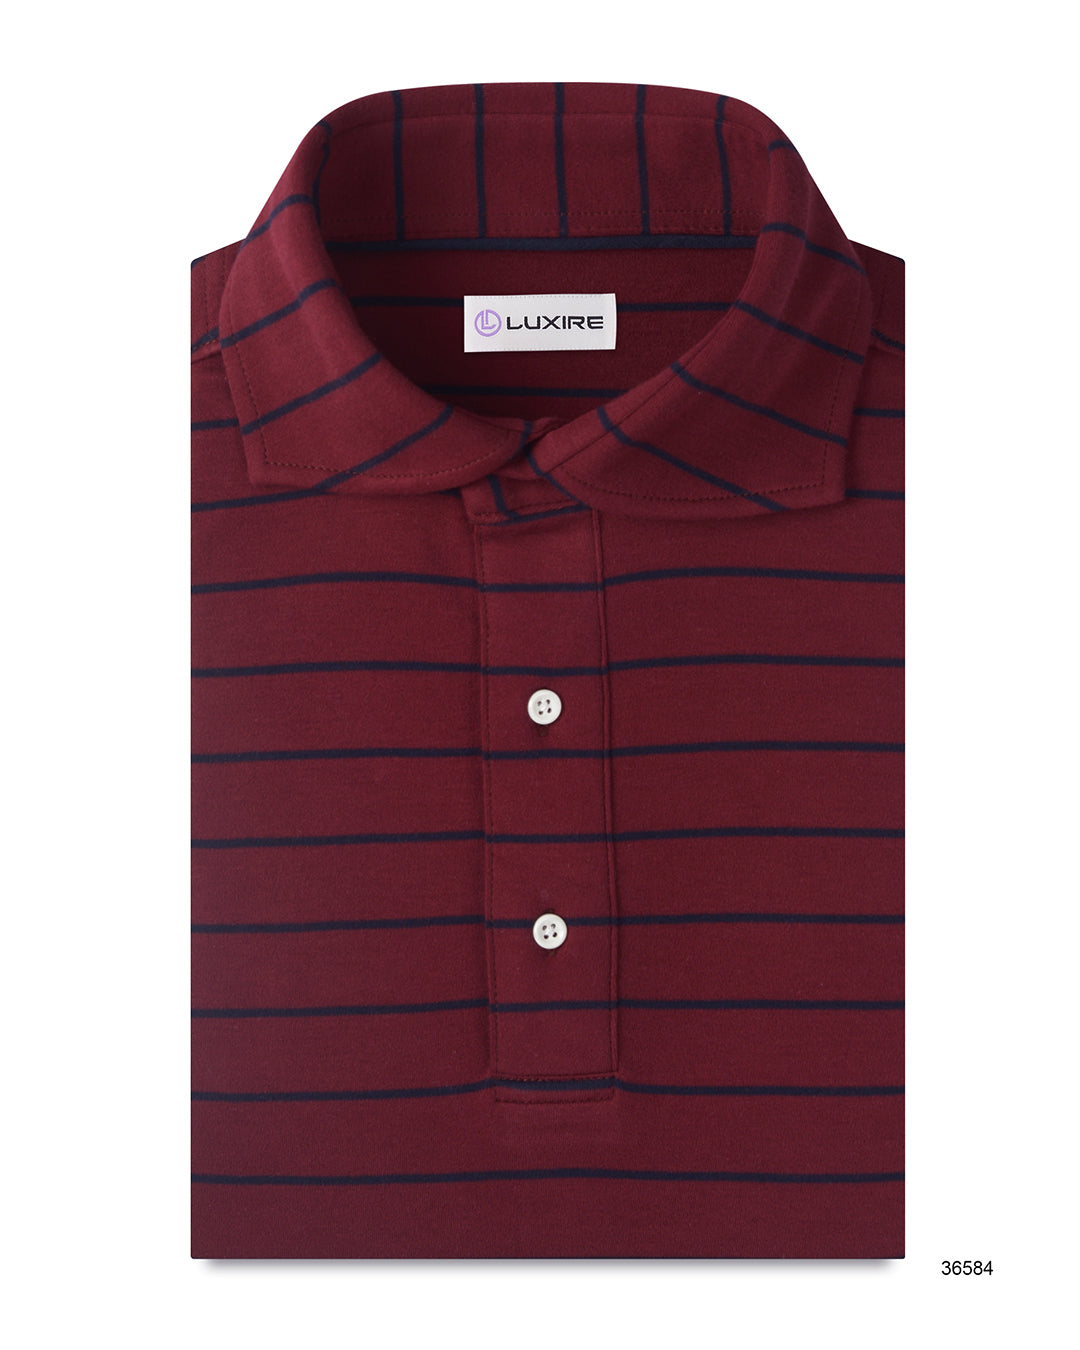 Front of the custom oxford polo shirt for men by Luxire in maroon with navy stripes